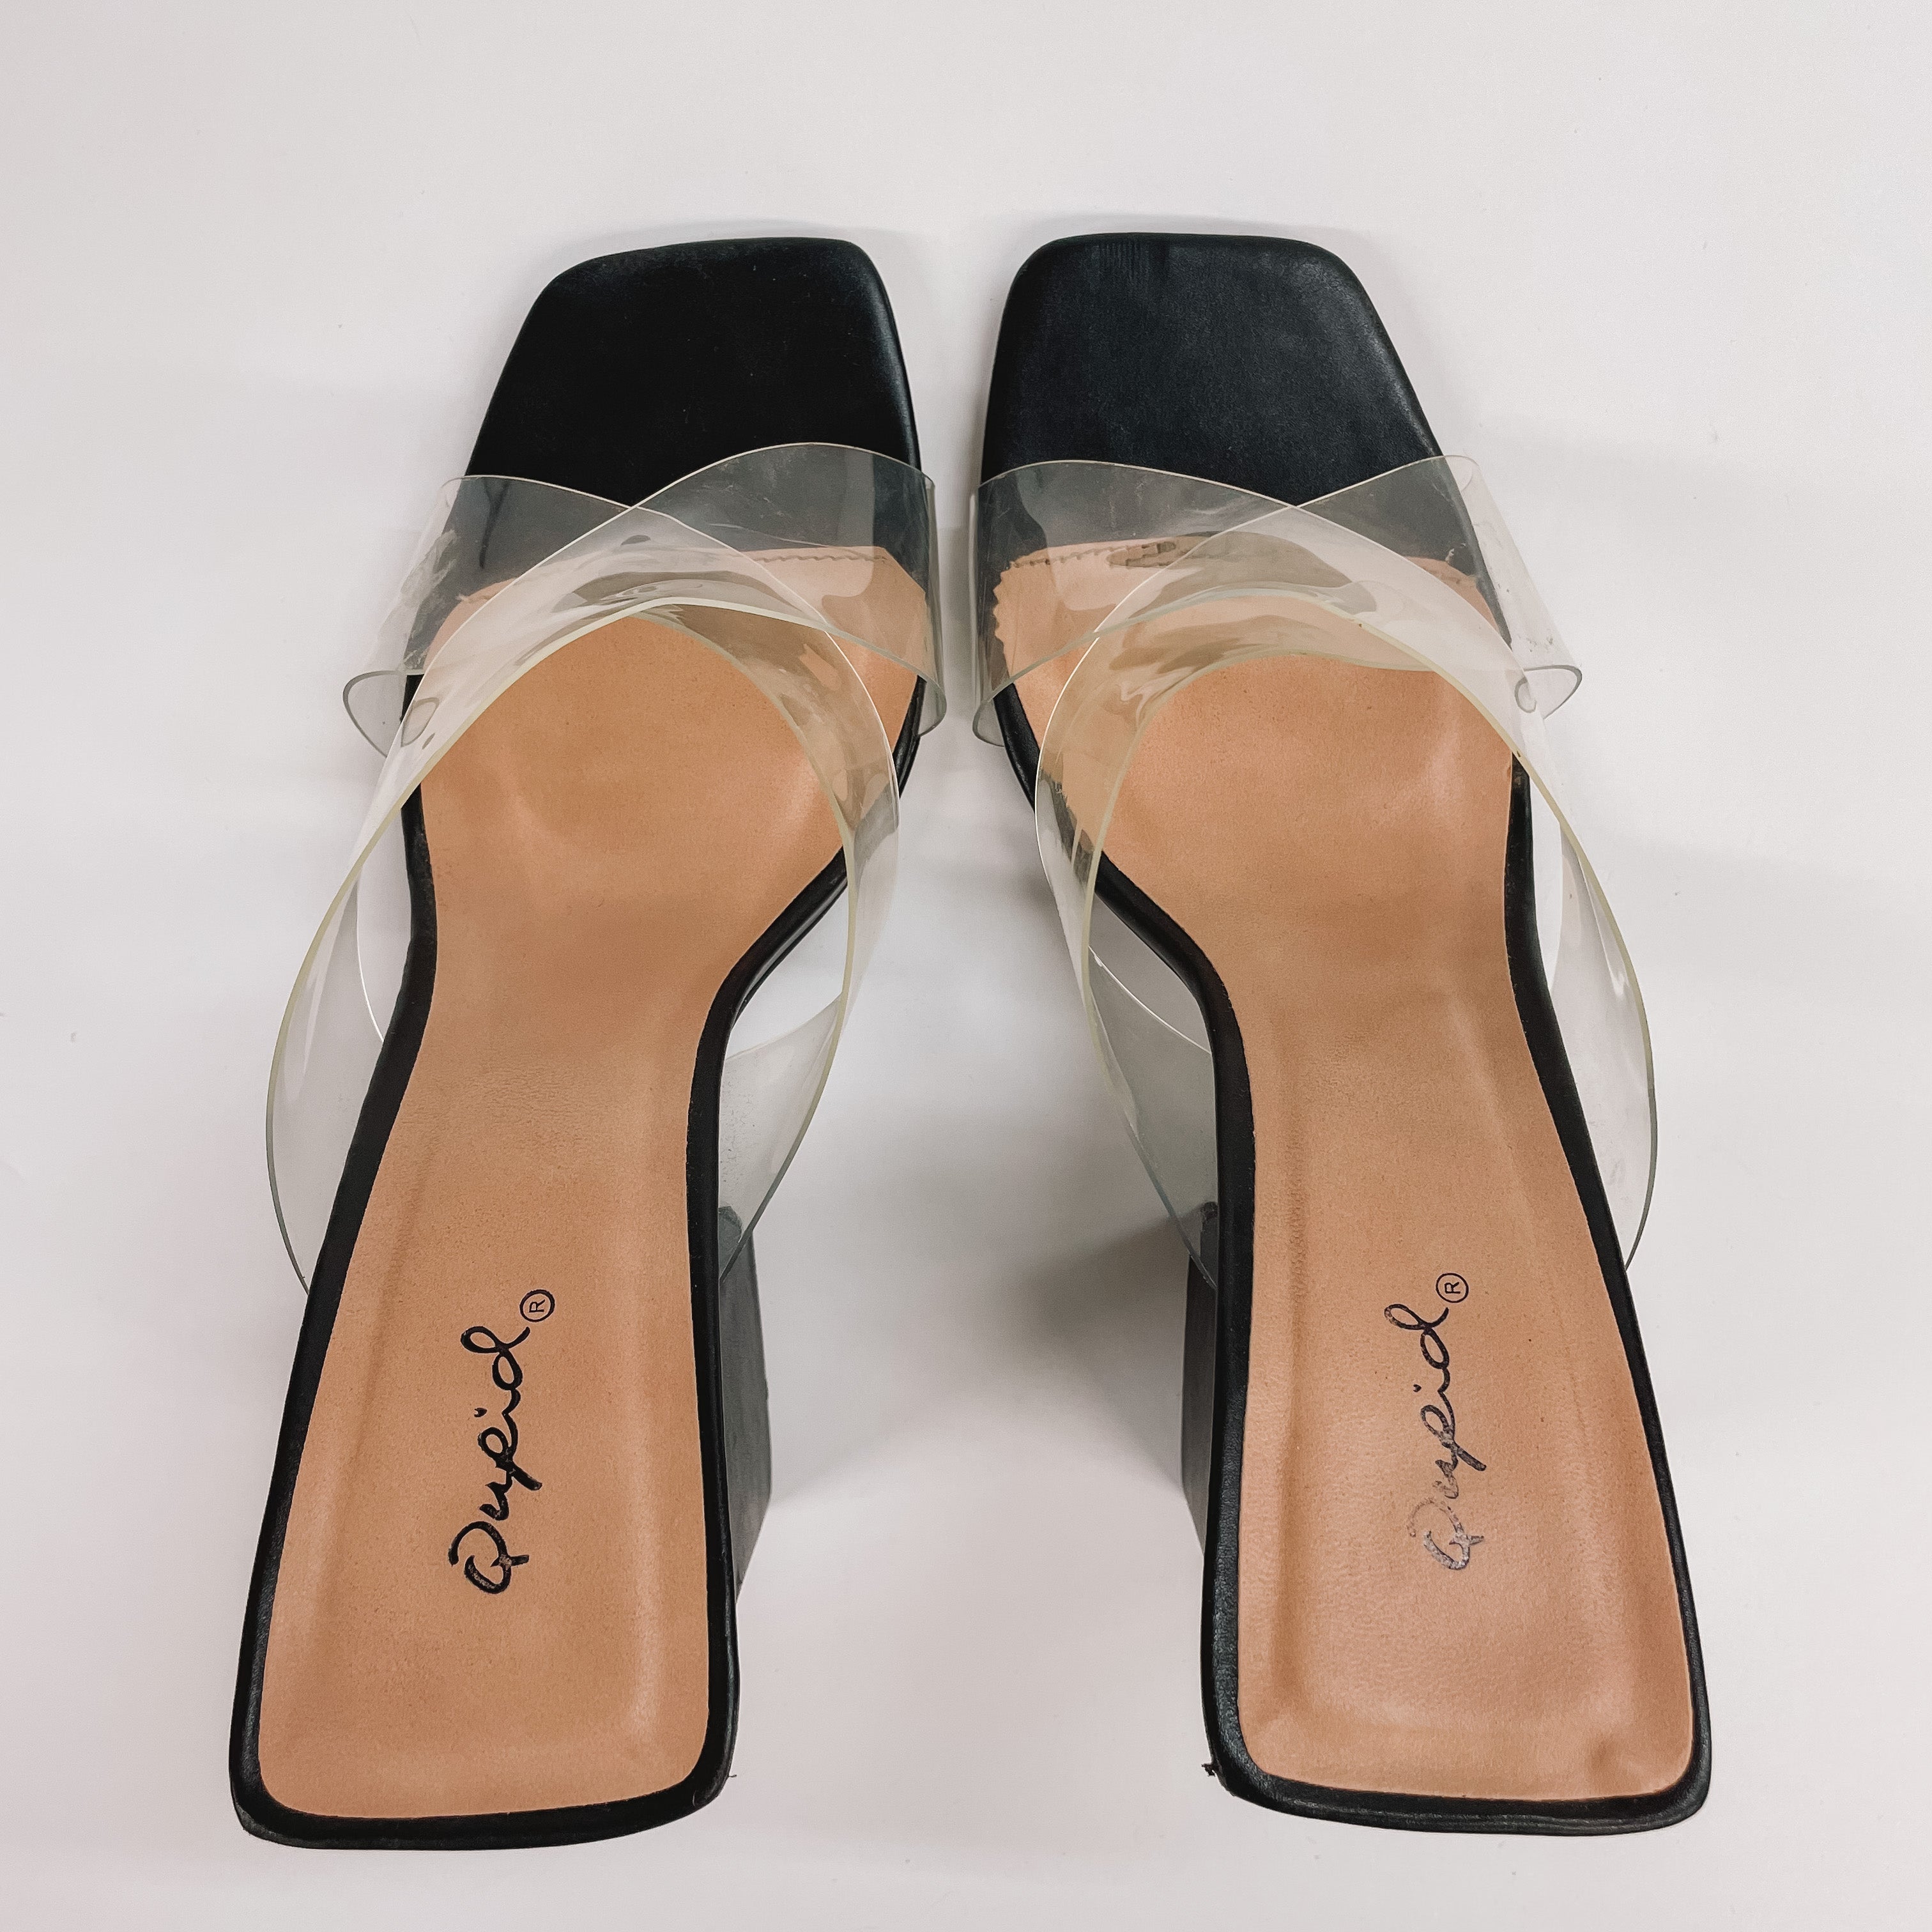 Model Shoes Size 9 | High Hopes Clear Criss Cross Block Heels in Black - Giddy Up Glamour Boutique